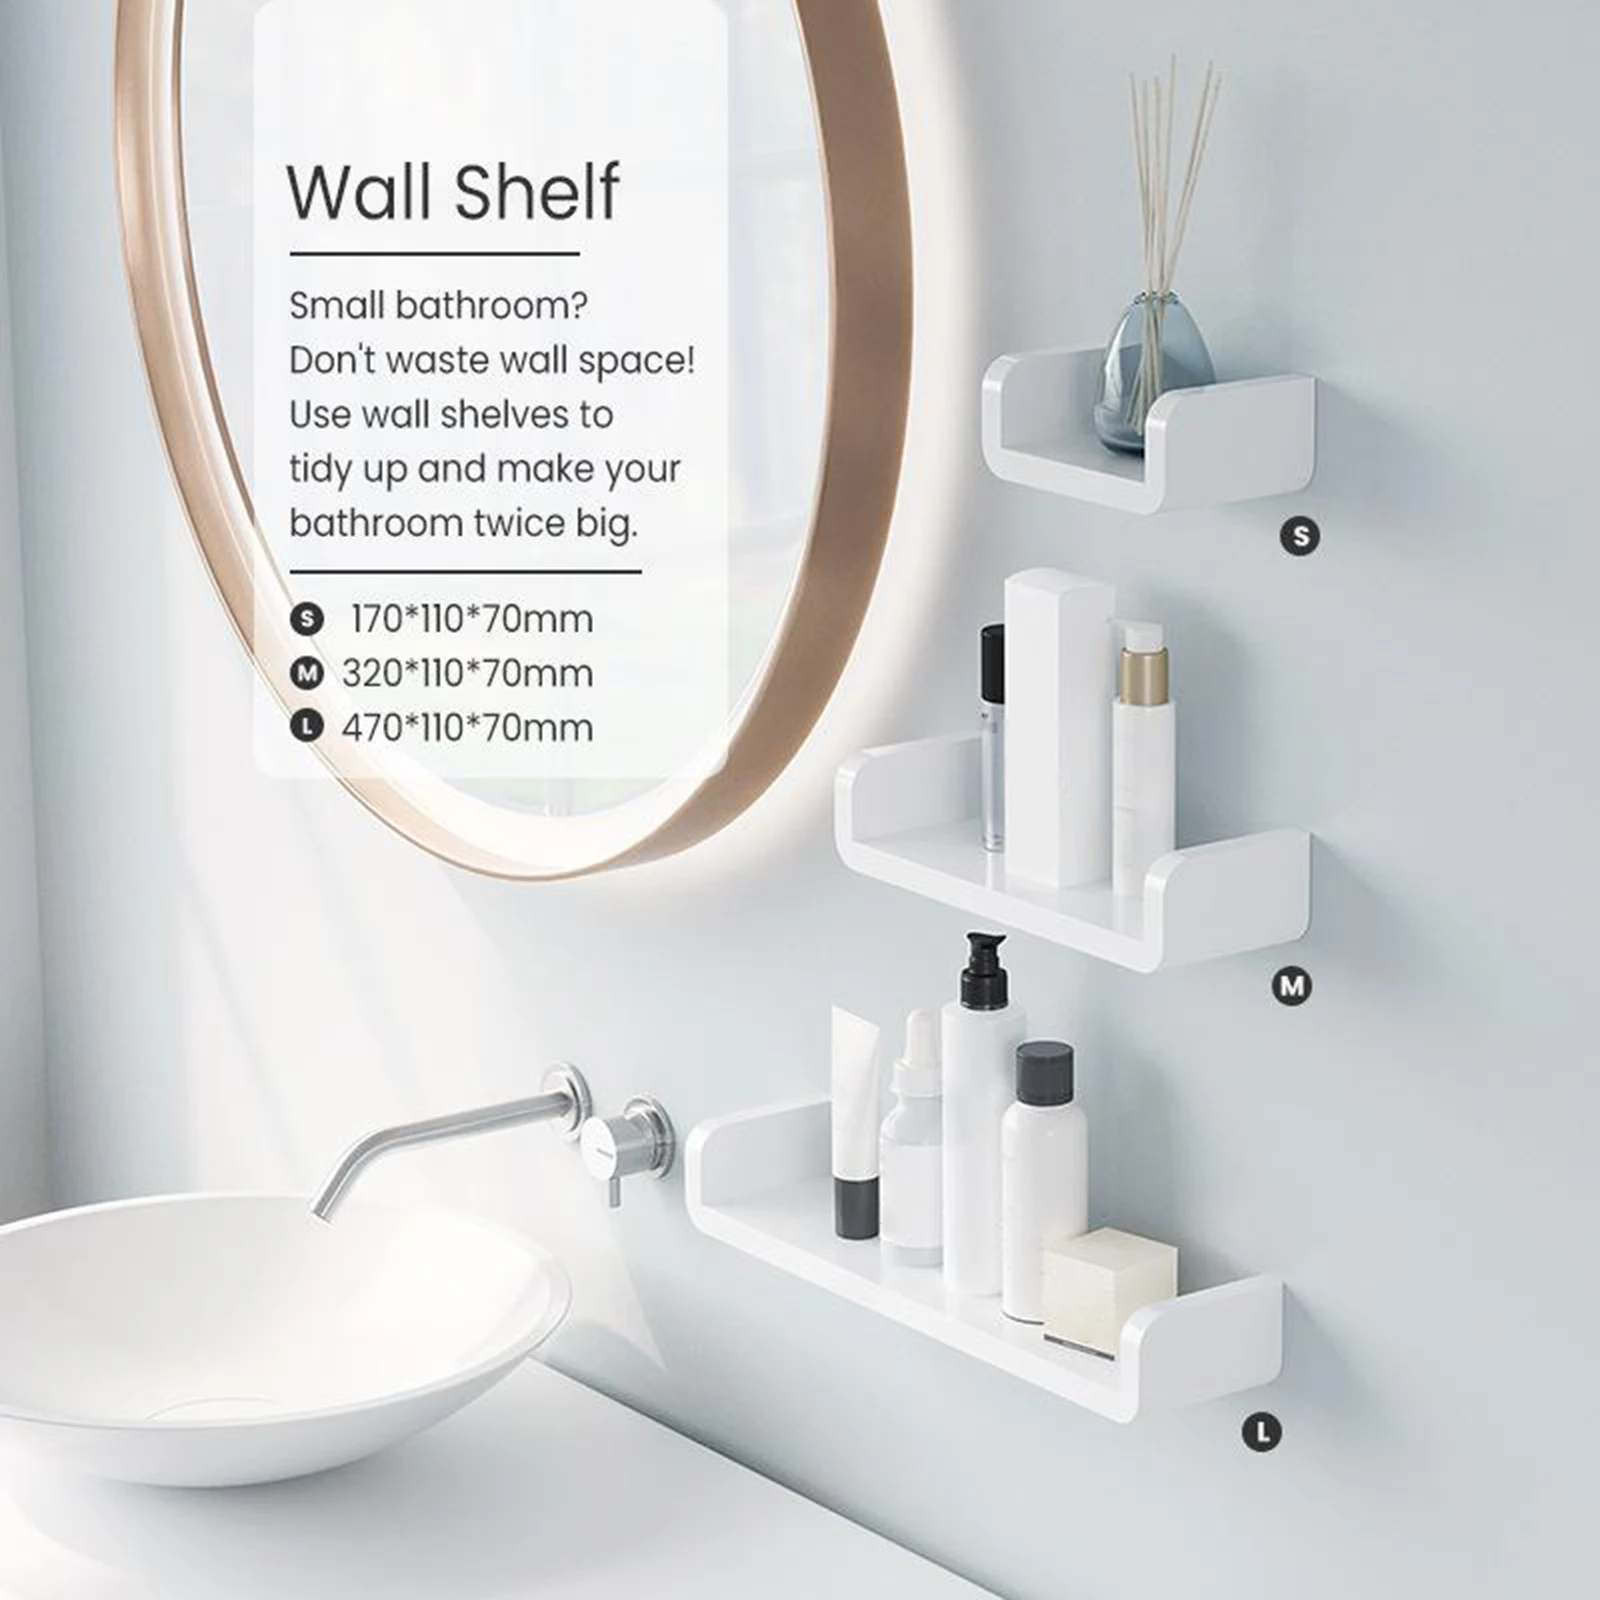 https://ae01.alicdn.com/kf/Haf97c0b2b6154ce884c96fb28b5de6025/U-shape-Adhesive-Non-Drilling-floating-shelves-Multi-Purpose-Wall-Hanging-Shelves-contemporary-style-Bathroom-Display.jpg